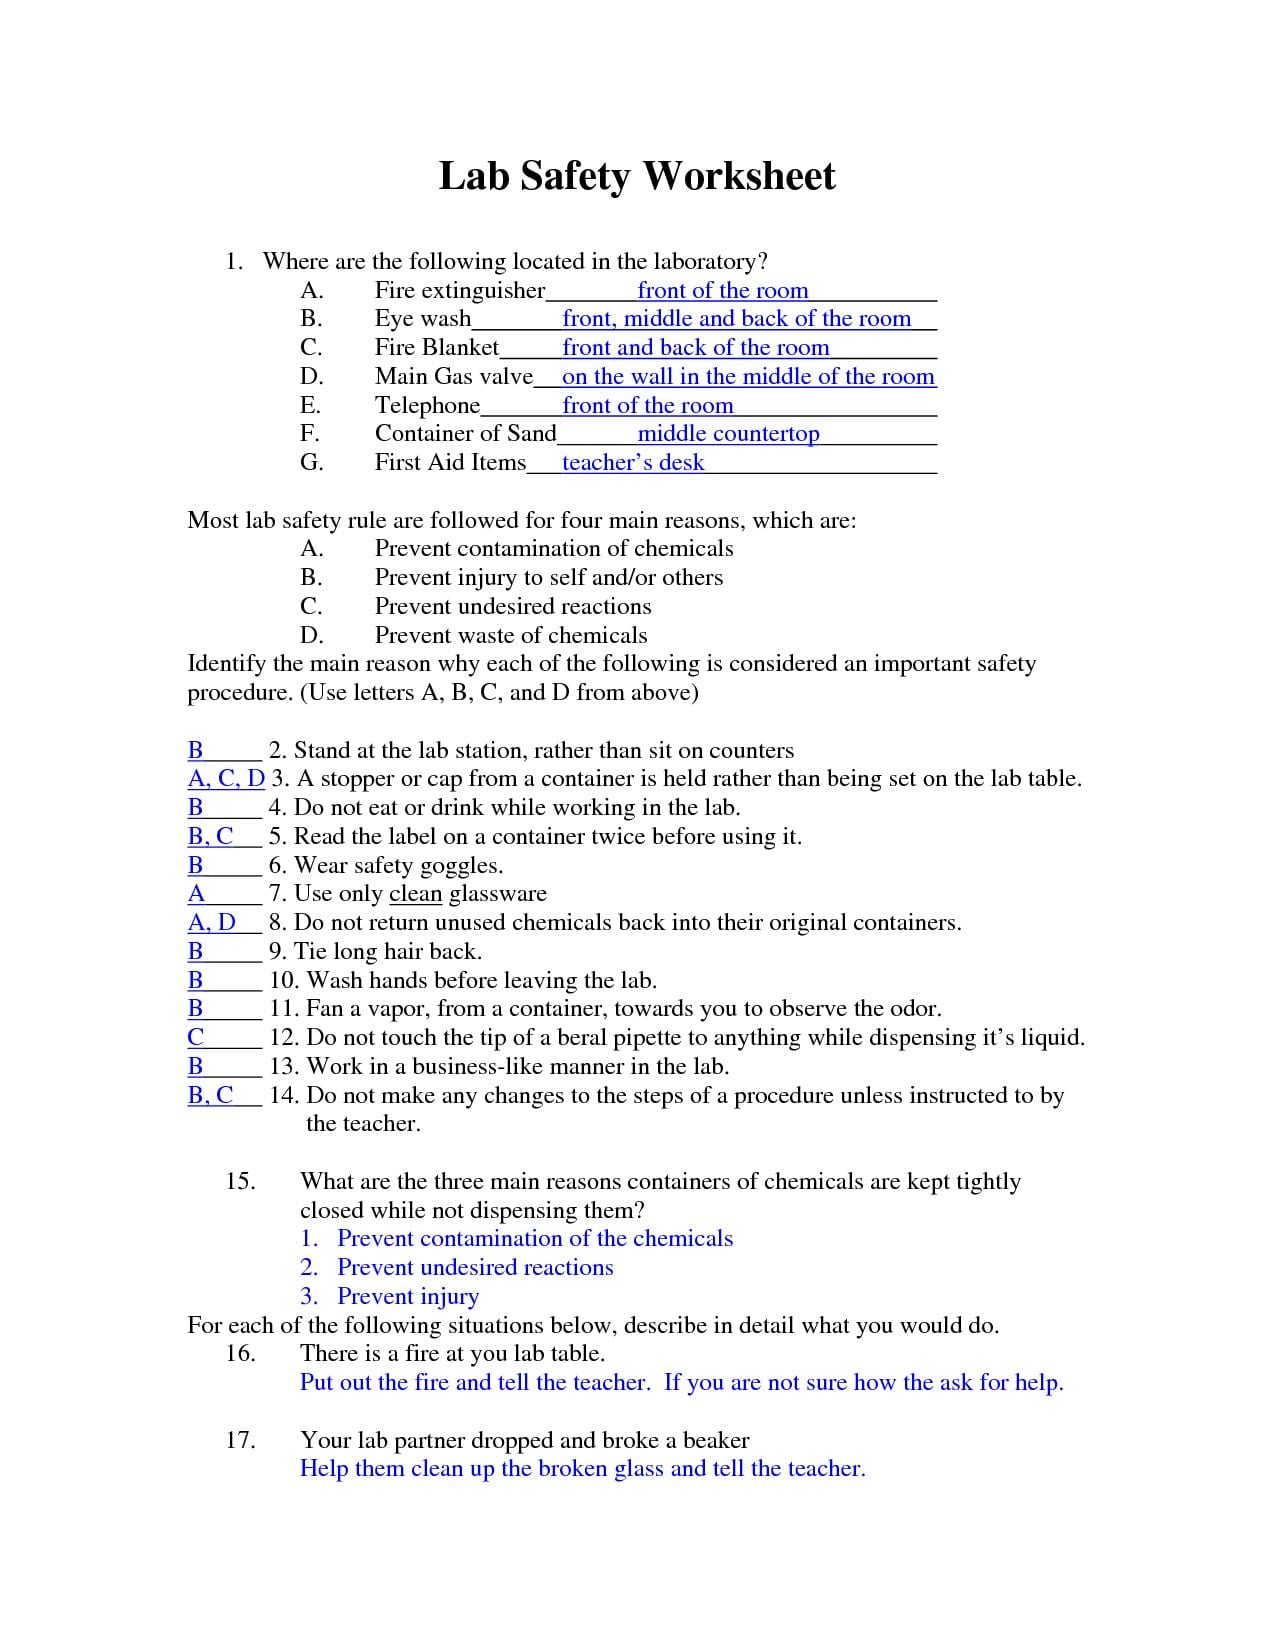 Lab Safety Worksheet Answers  Soccerphysicsonline Throughout Lab Safety Worksheet Answers